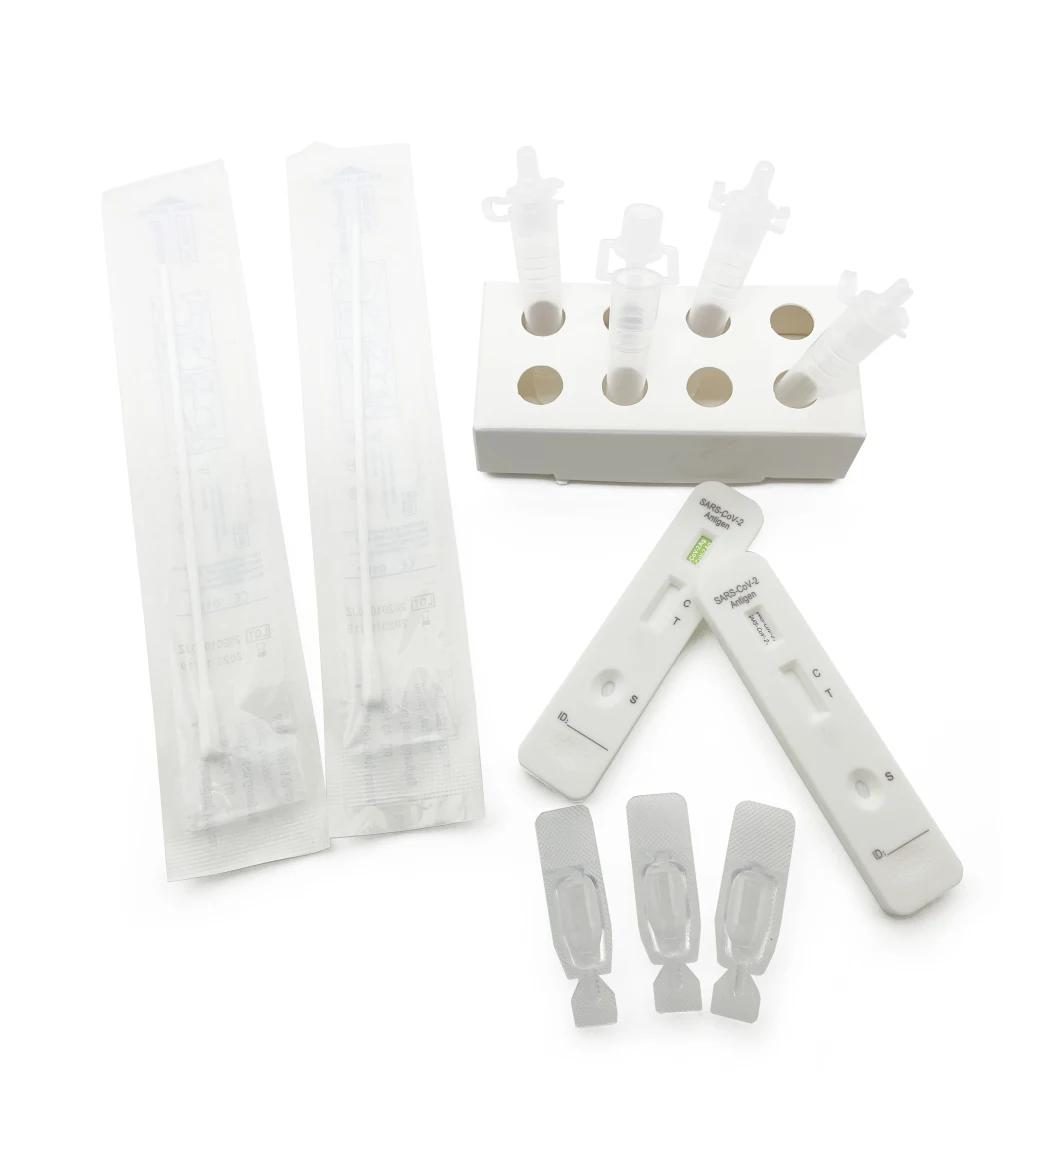 Antigen Rapid Test Kit One Step Nasal Antibody Rapid Test with CE Approved